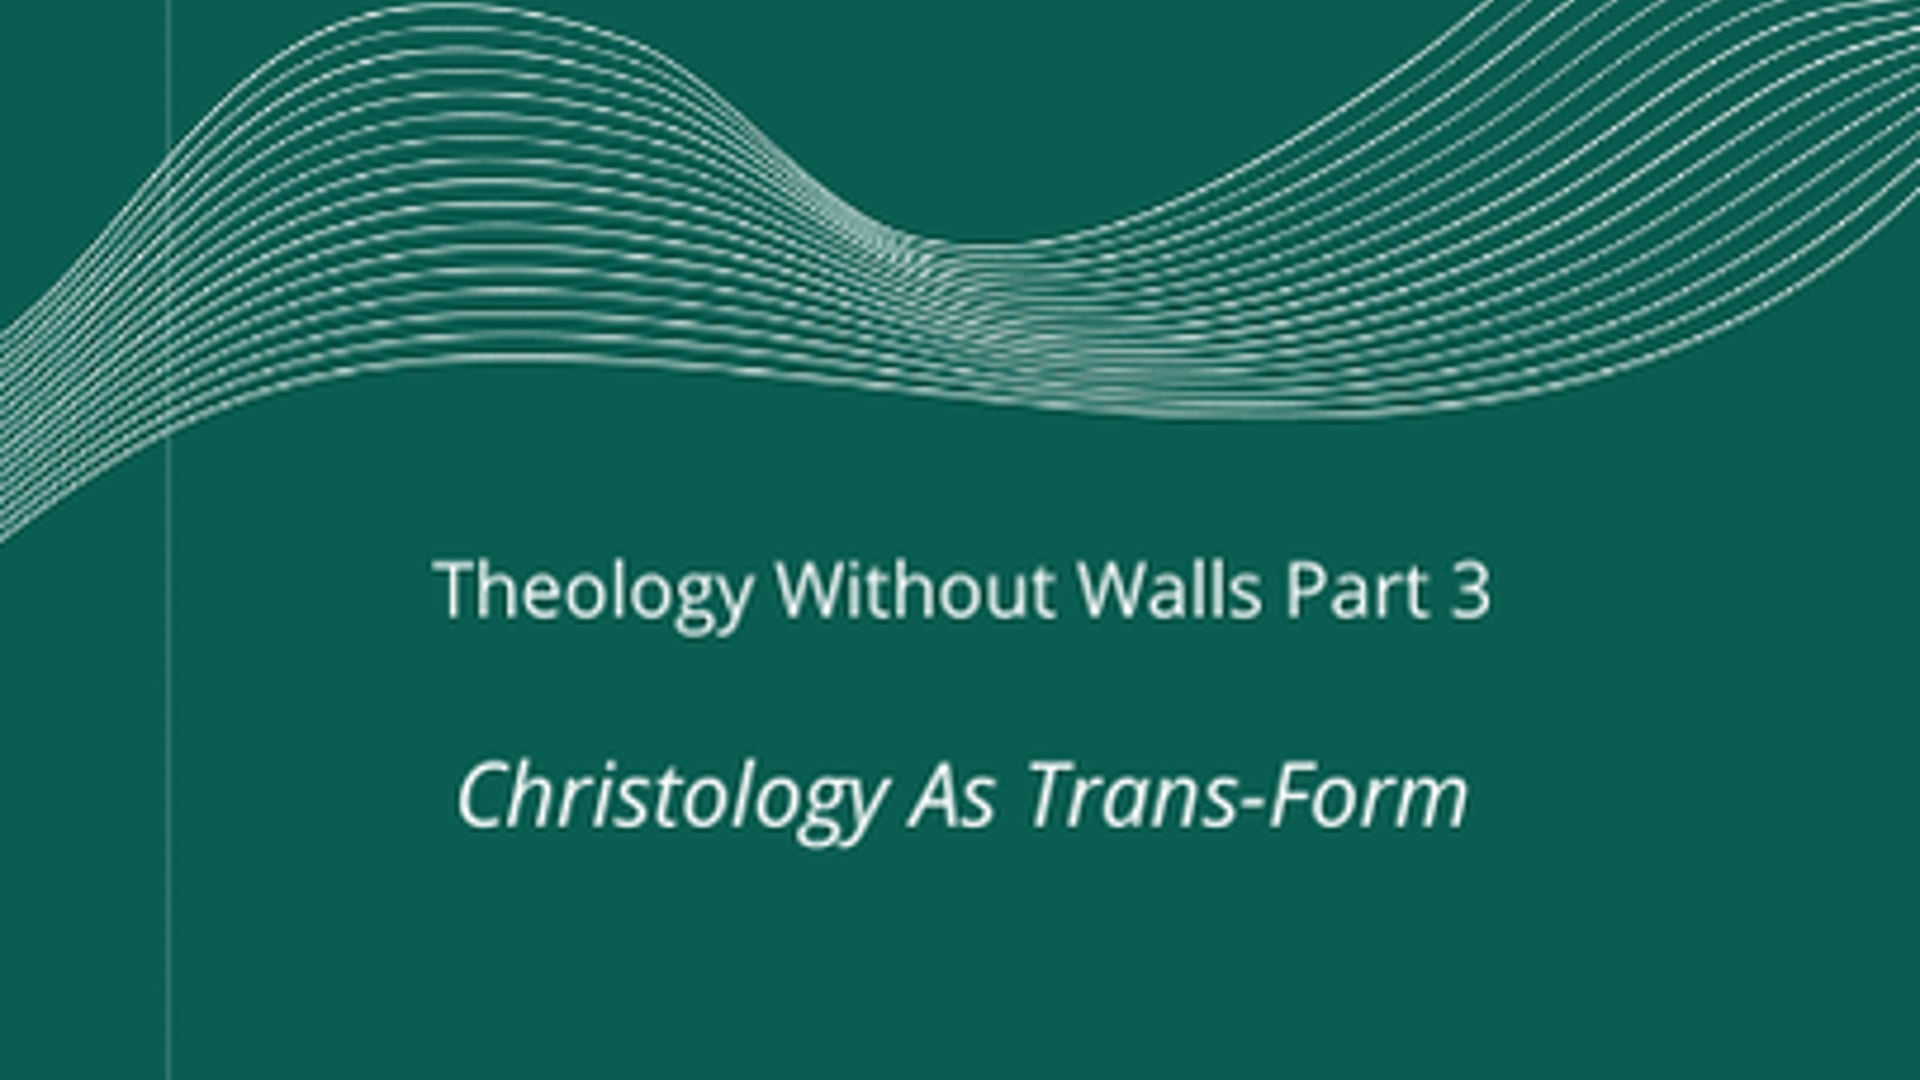 Theology Without Walls Part 3 - Christology as Trans-Form